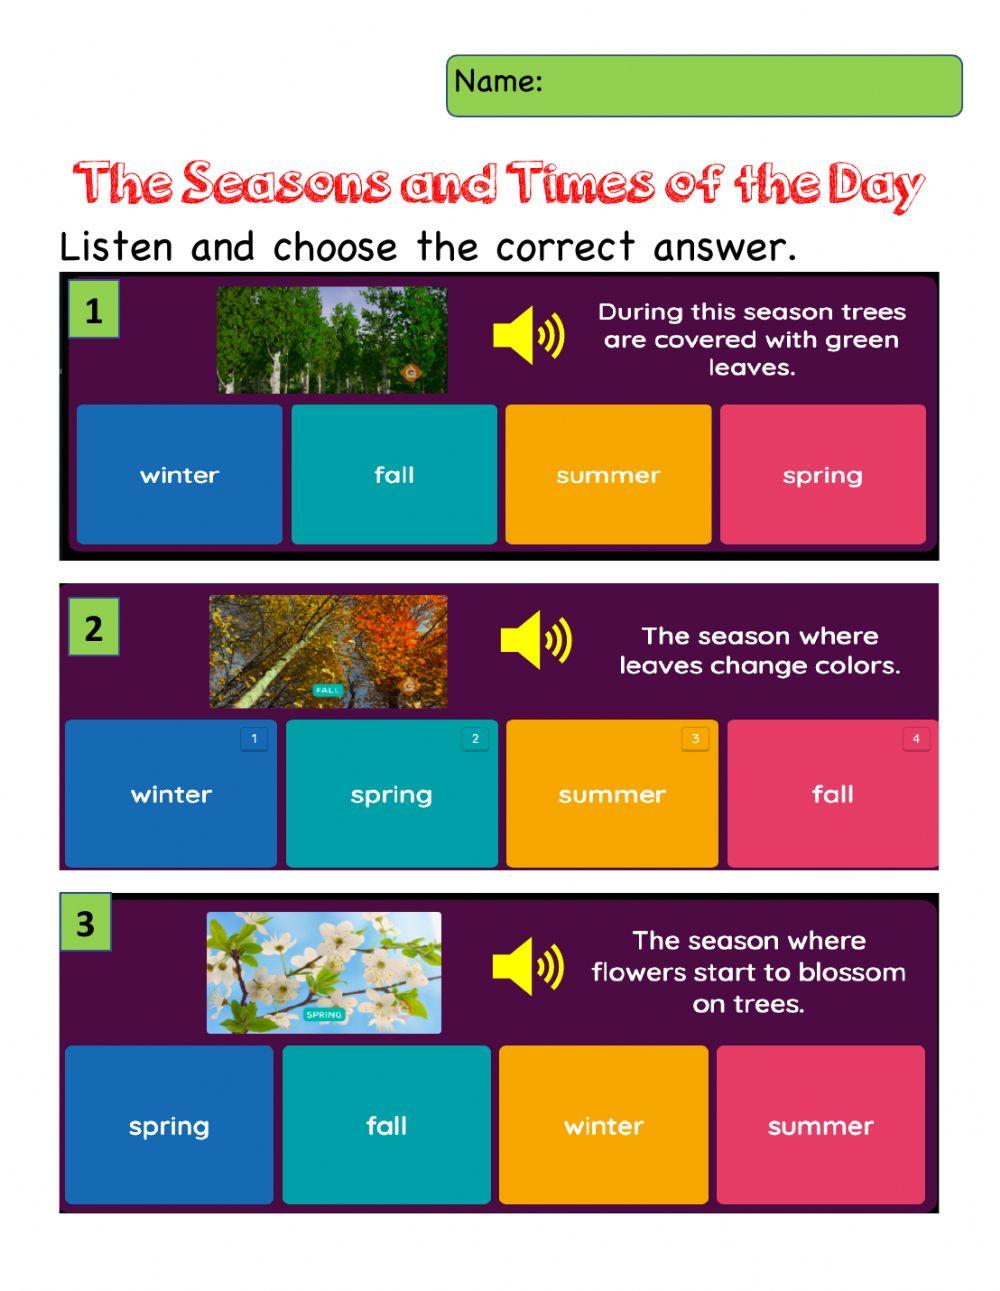 The Seasons and Times of the Day